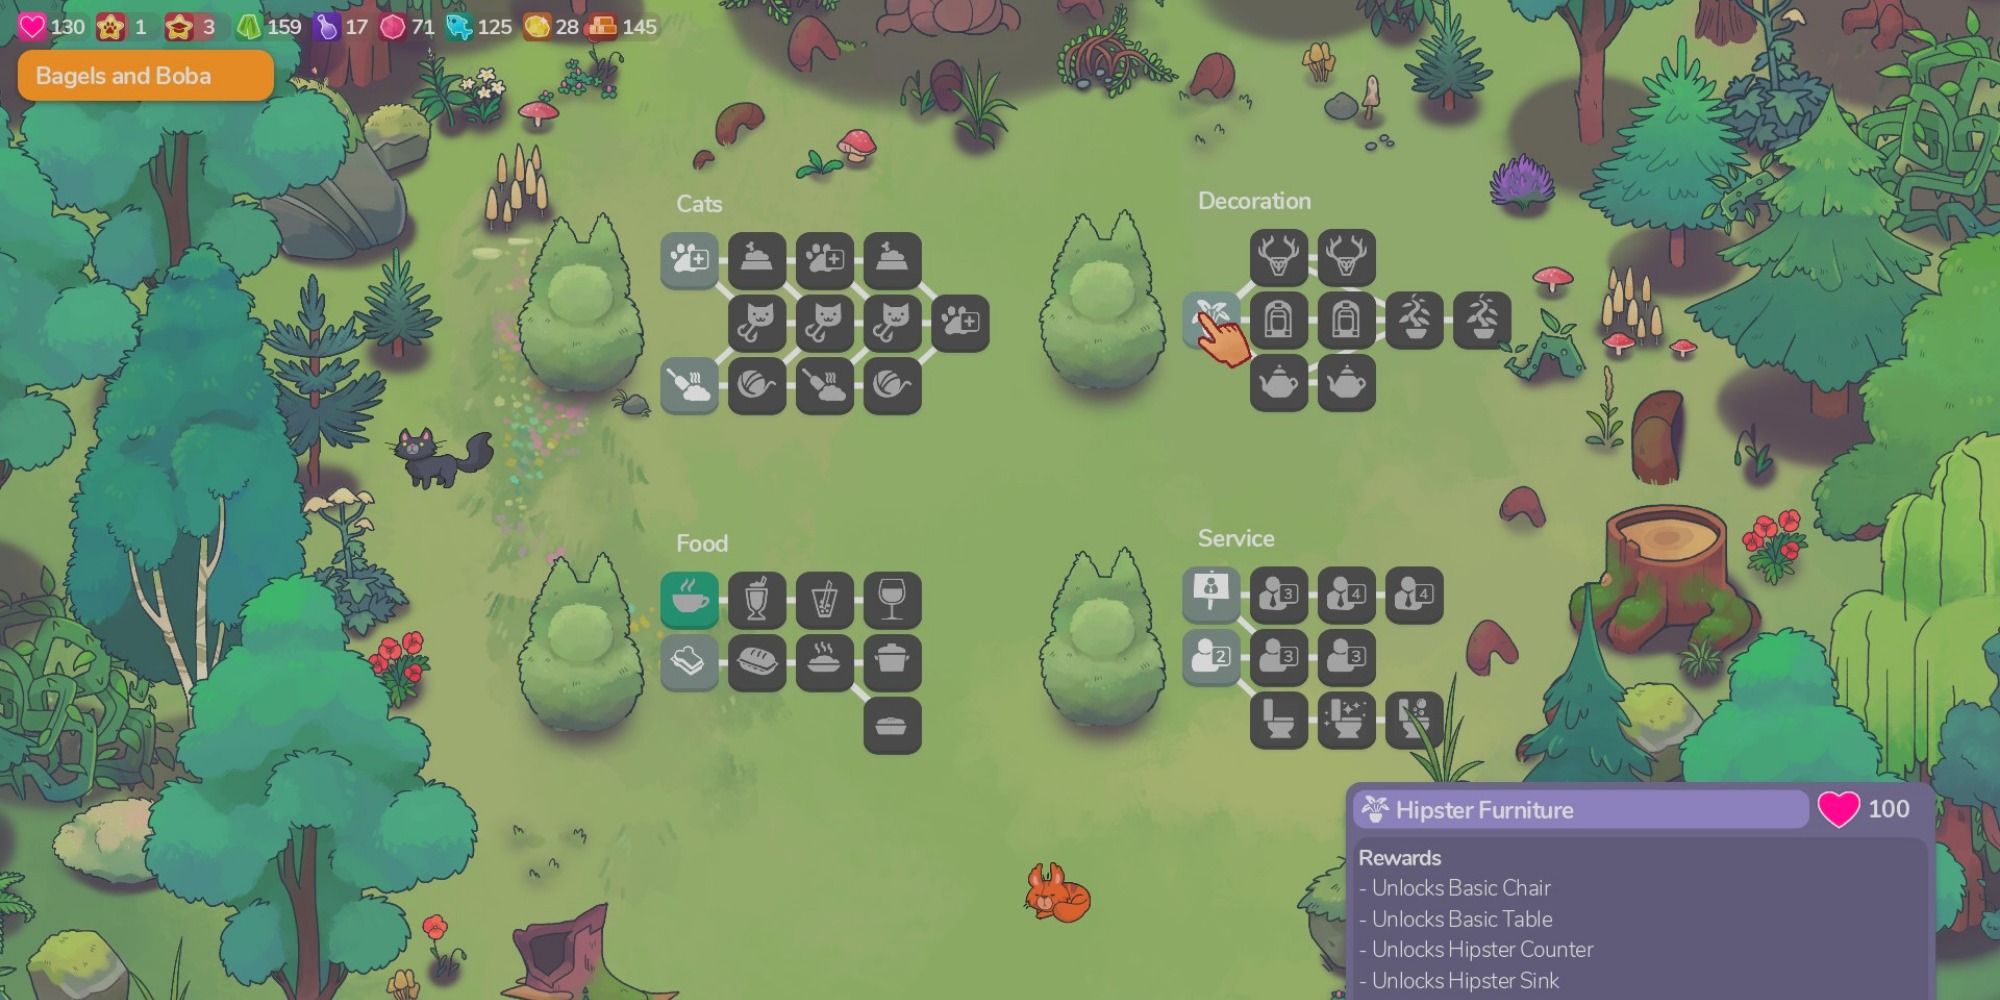 Skill tree menu overlaid on a forest glade with cat shaped bushes